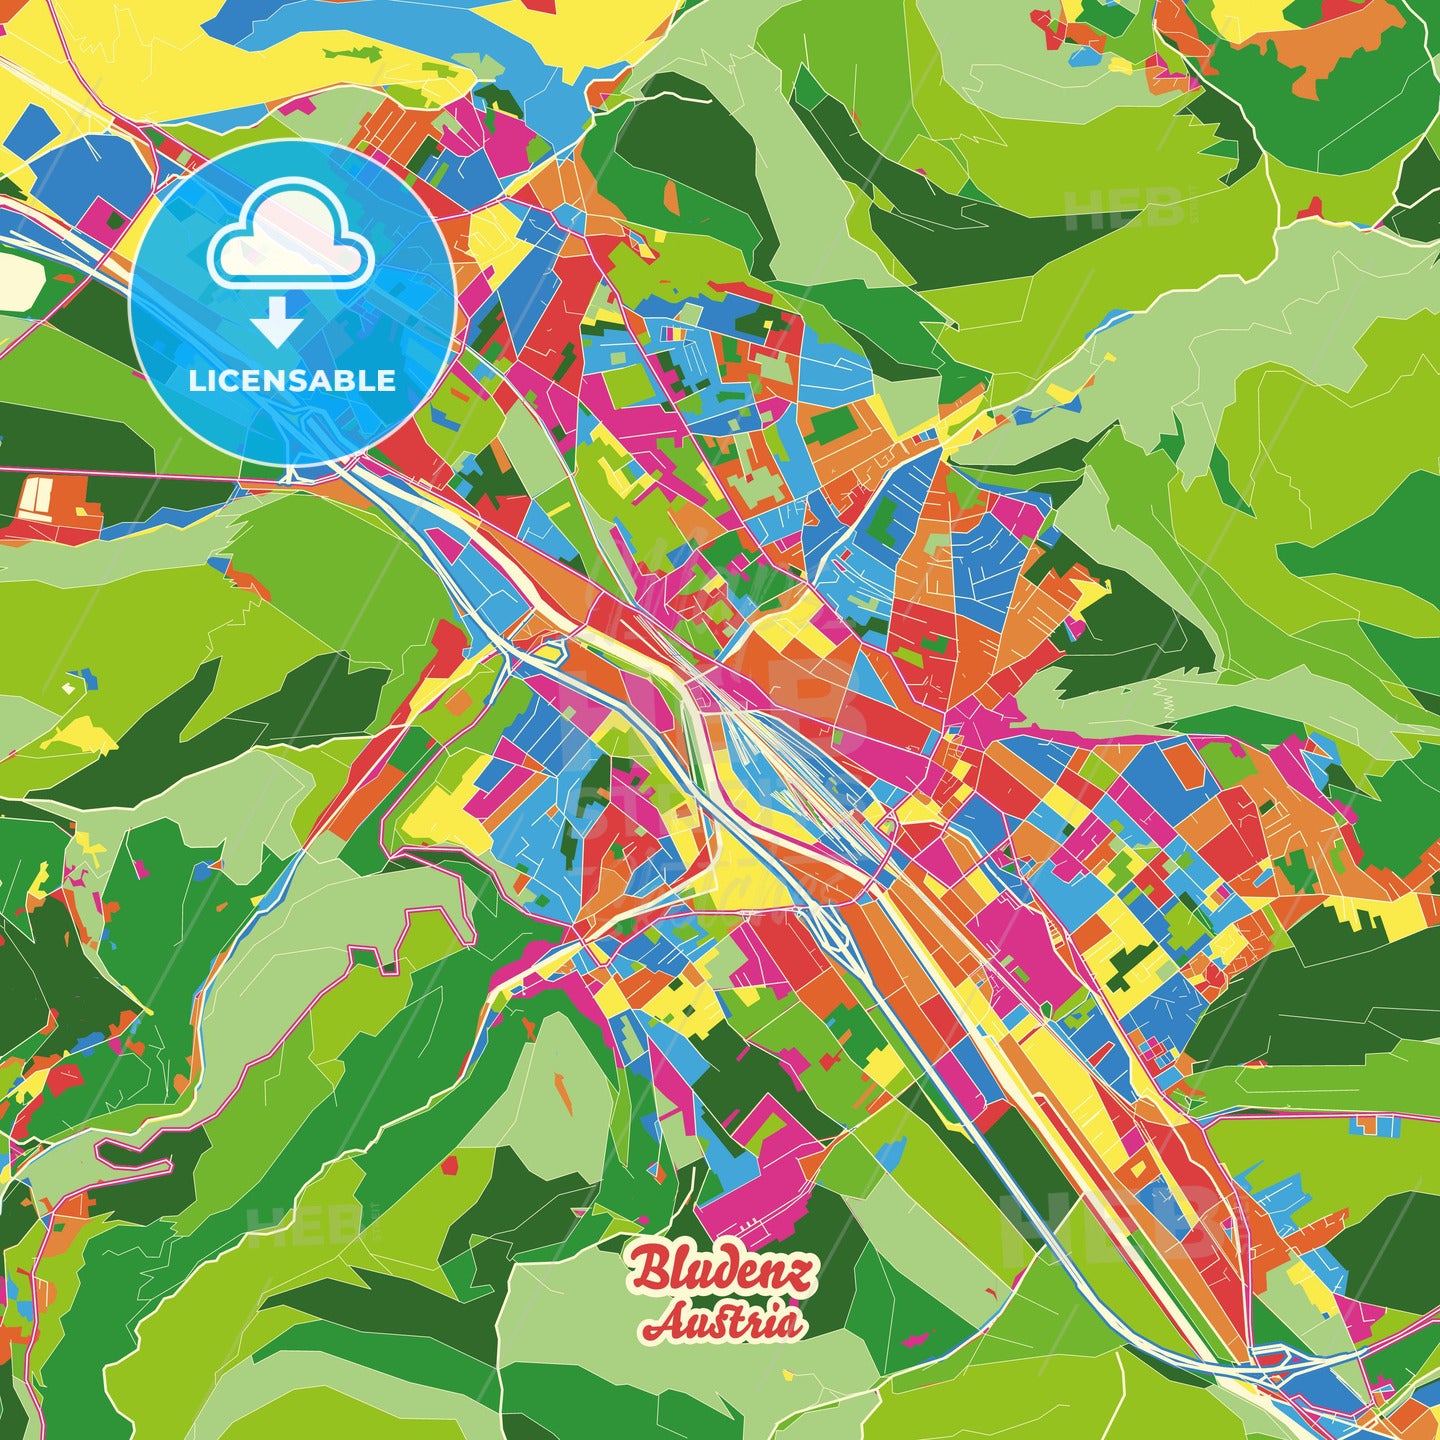 Bludenz, Austria Crazy Colorful Street Map Poster Template - HEBSTREITS Sketches